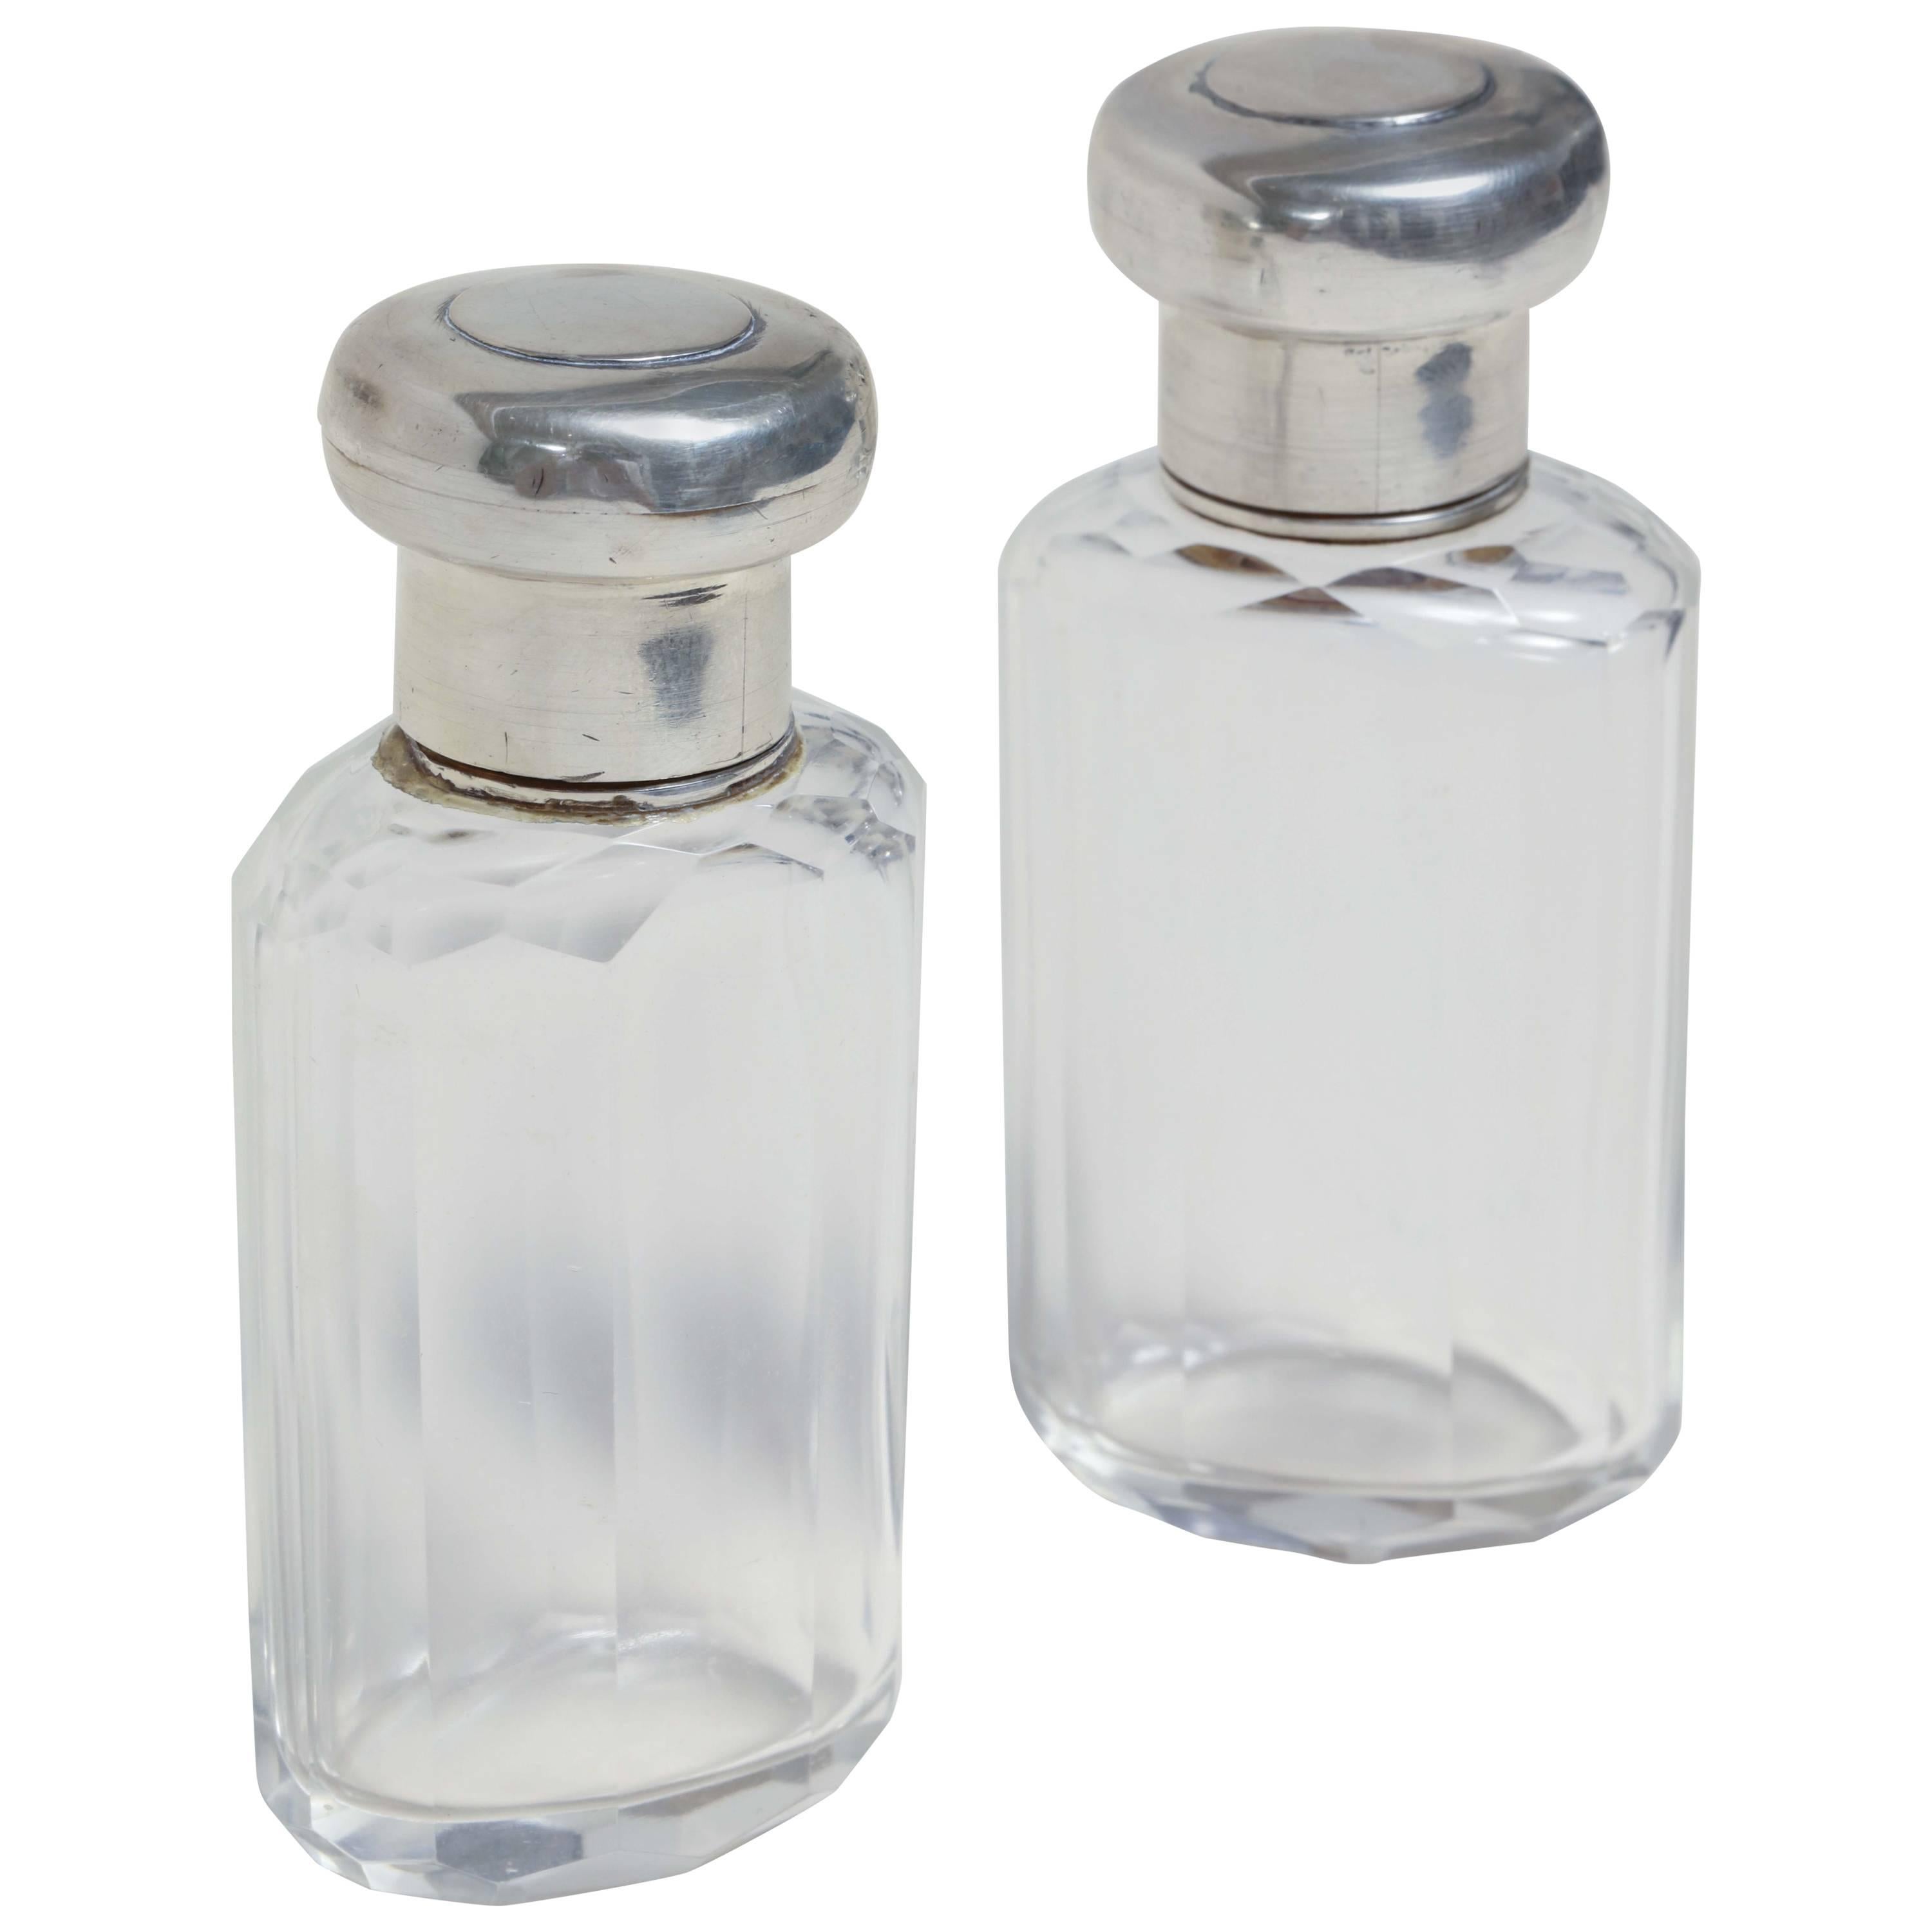 K.B. & Co. English Art Deco Pair of Crystal & Sterling Silver Scent Bottles